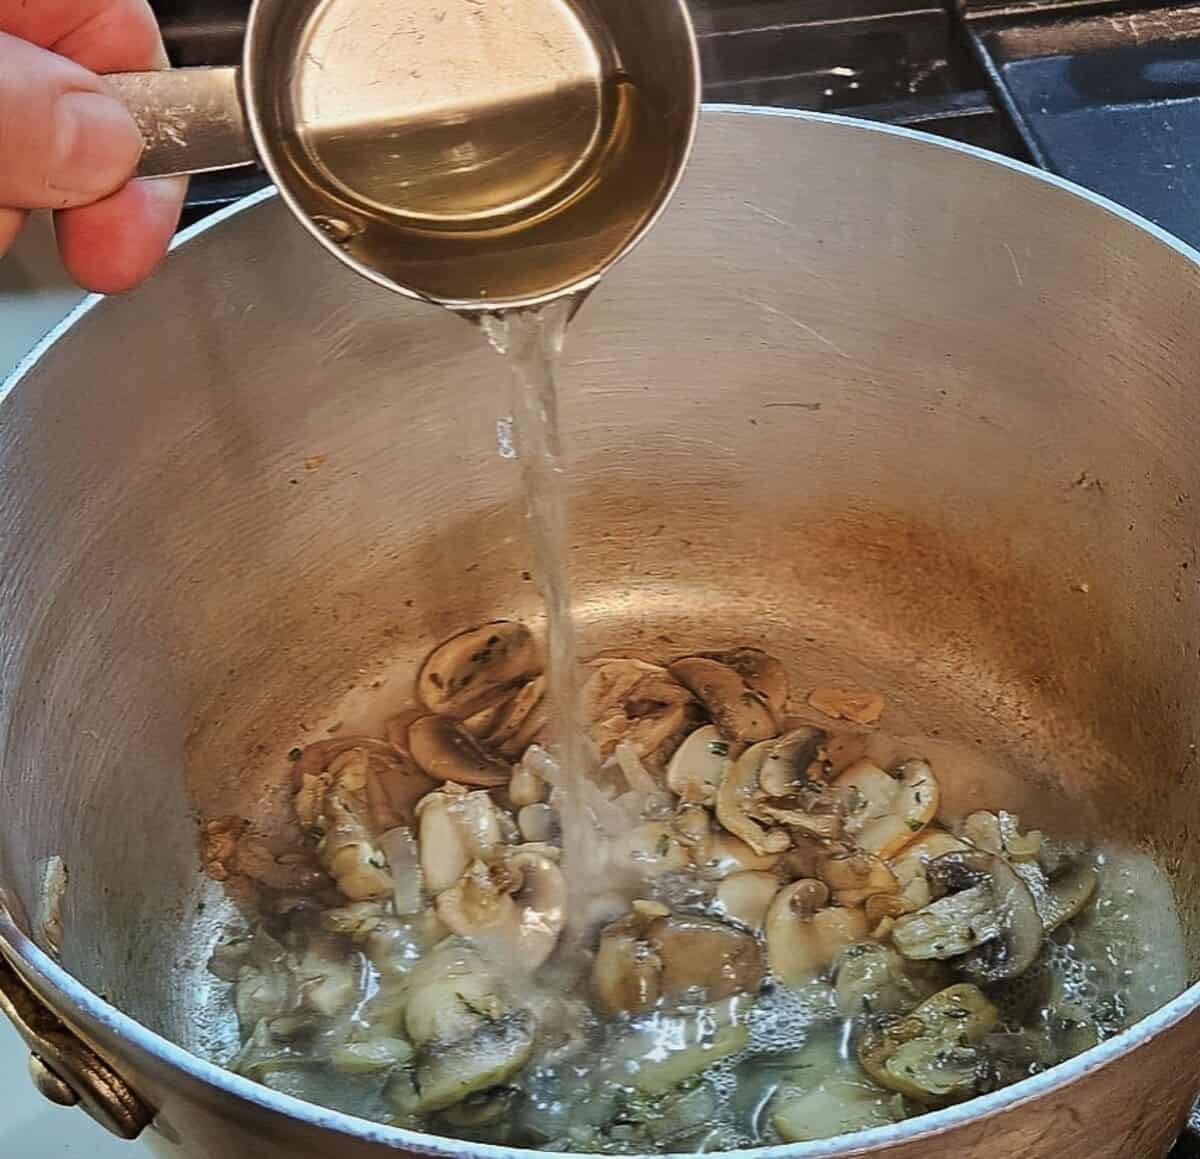 sautéed mushrooms, shallots,, garlic, and rosemary in a saucepan with white wine being poured in.